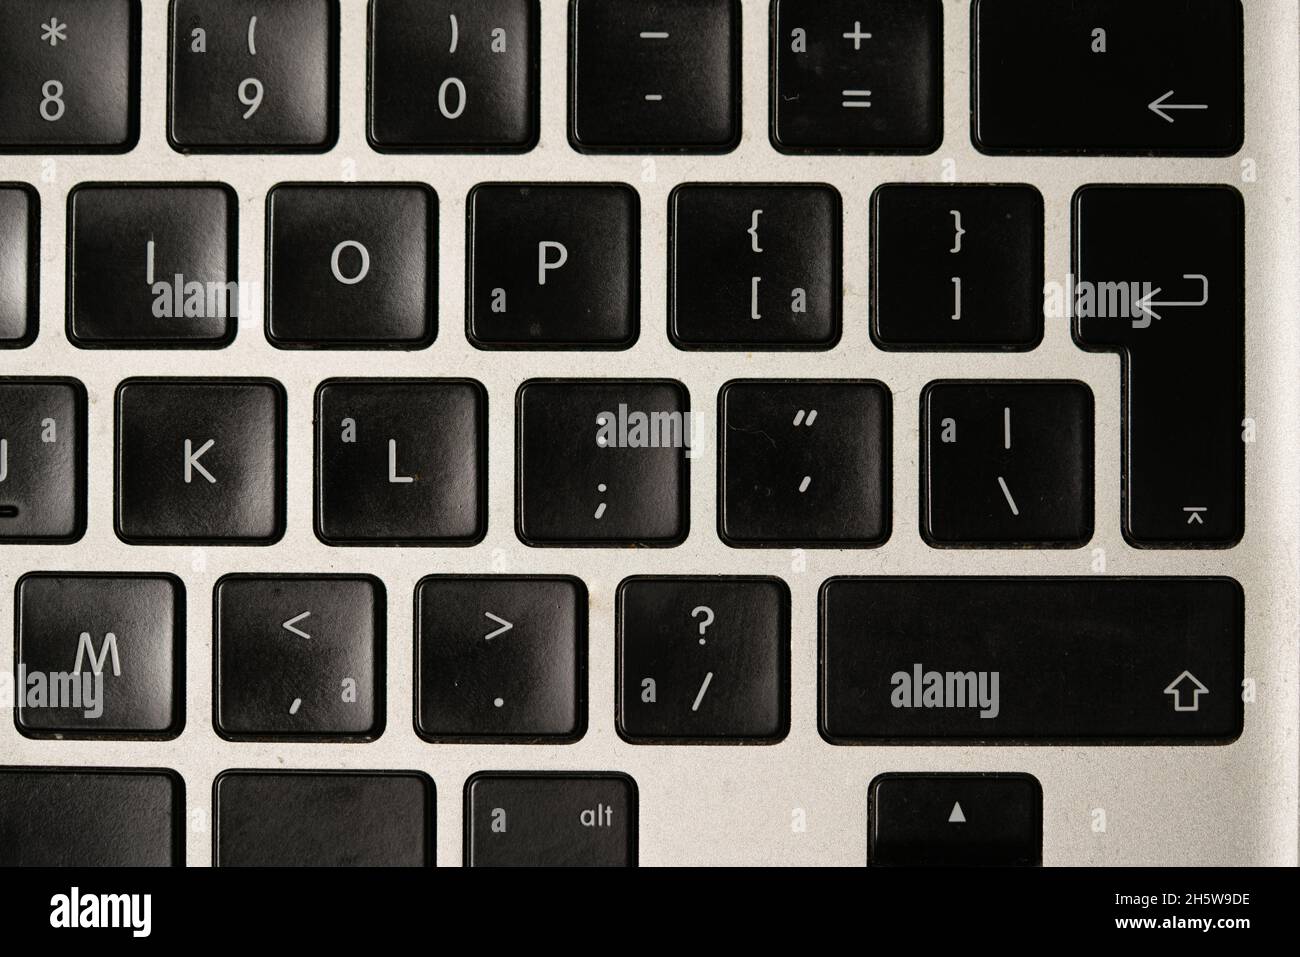 photo of a black qwerty keyboard on a silver background Stock Photo